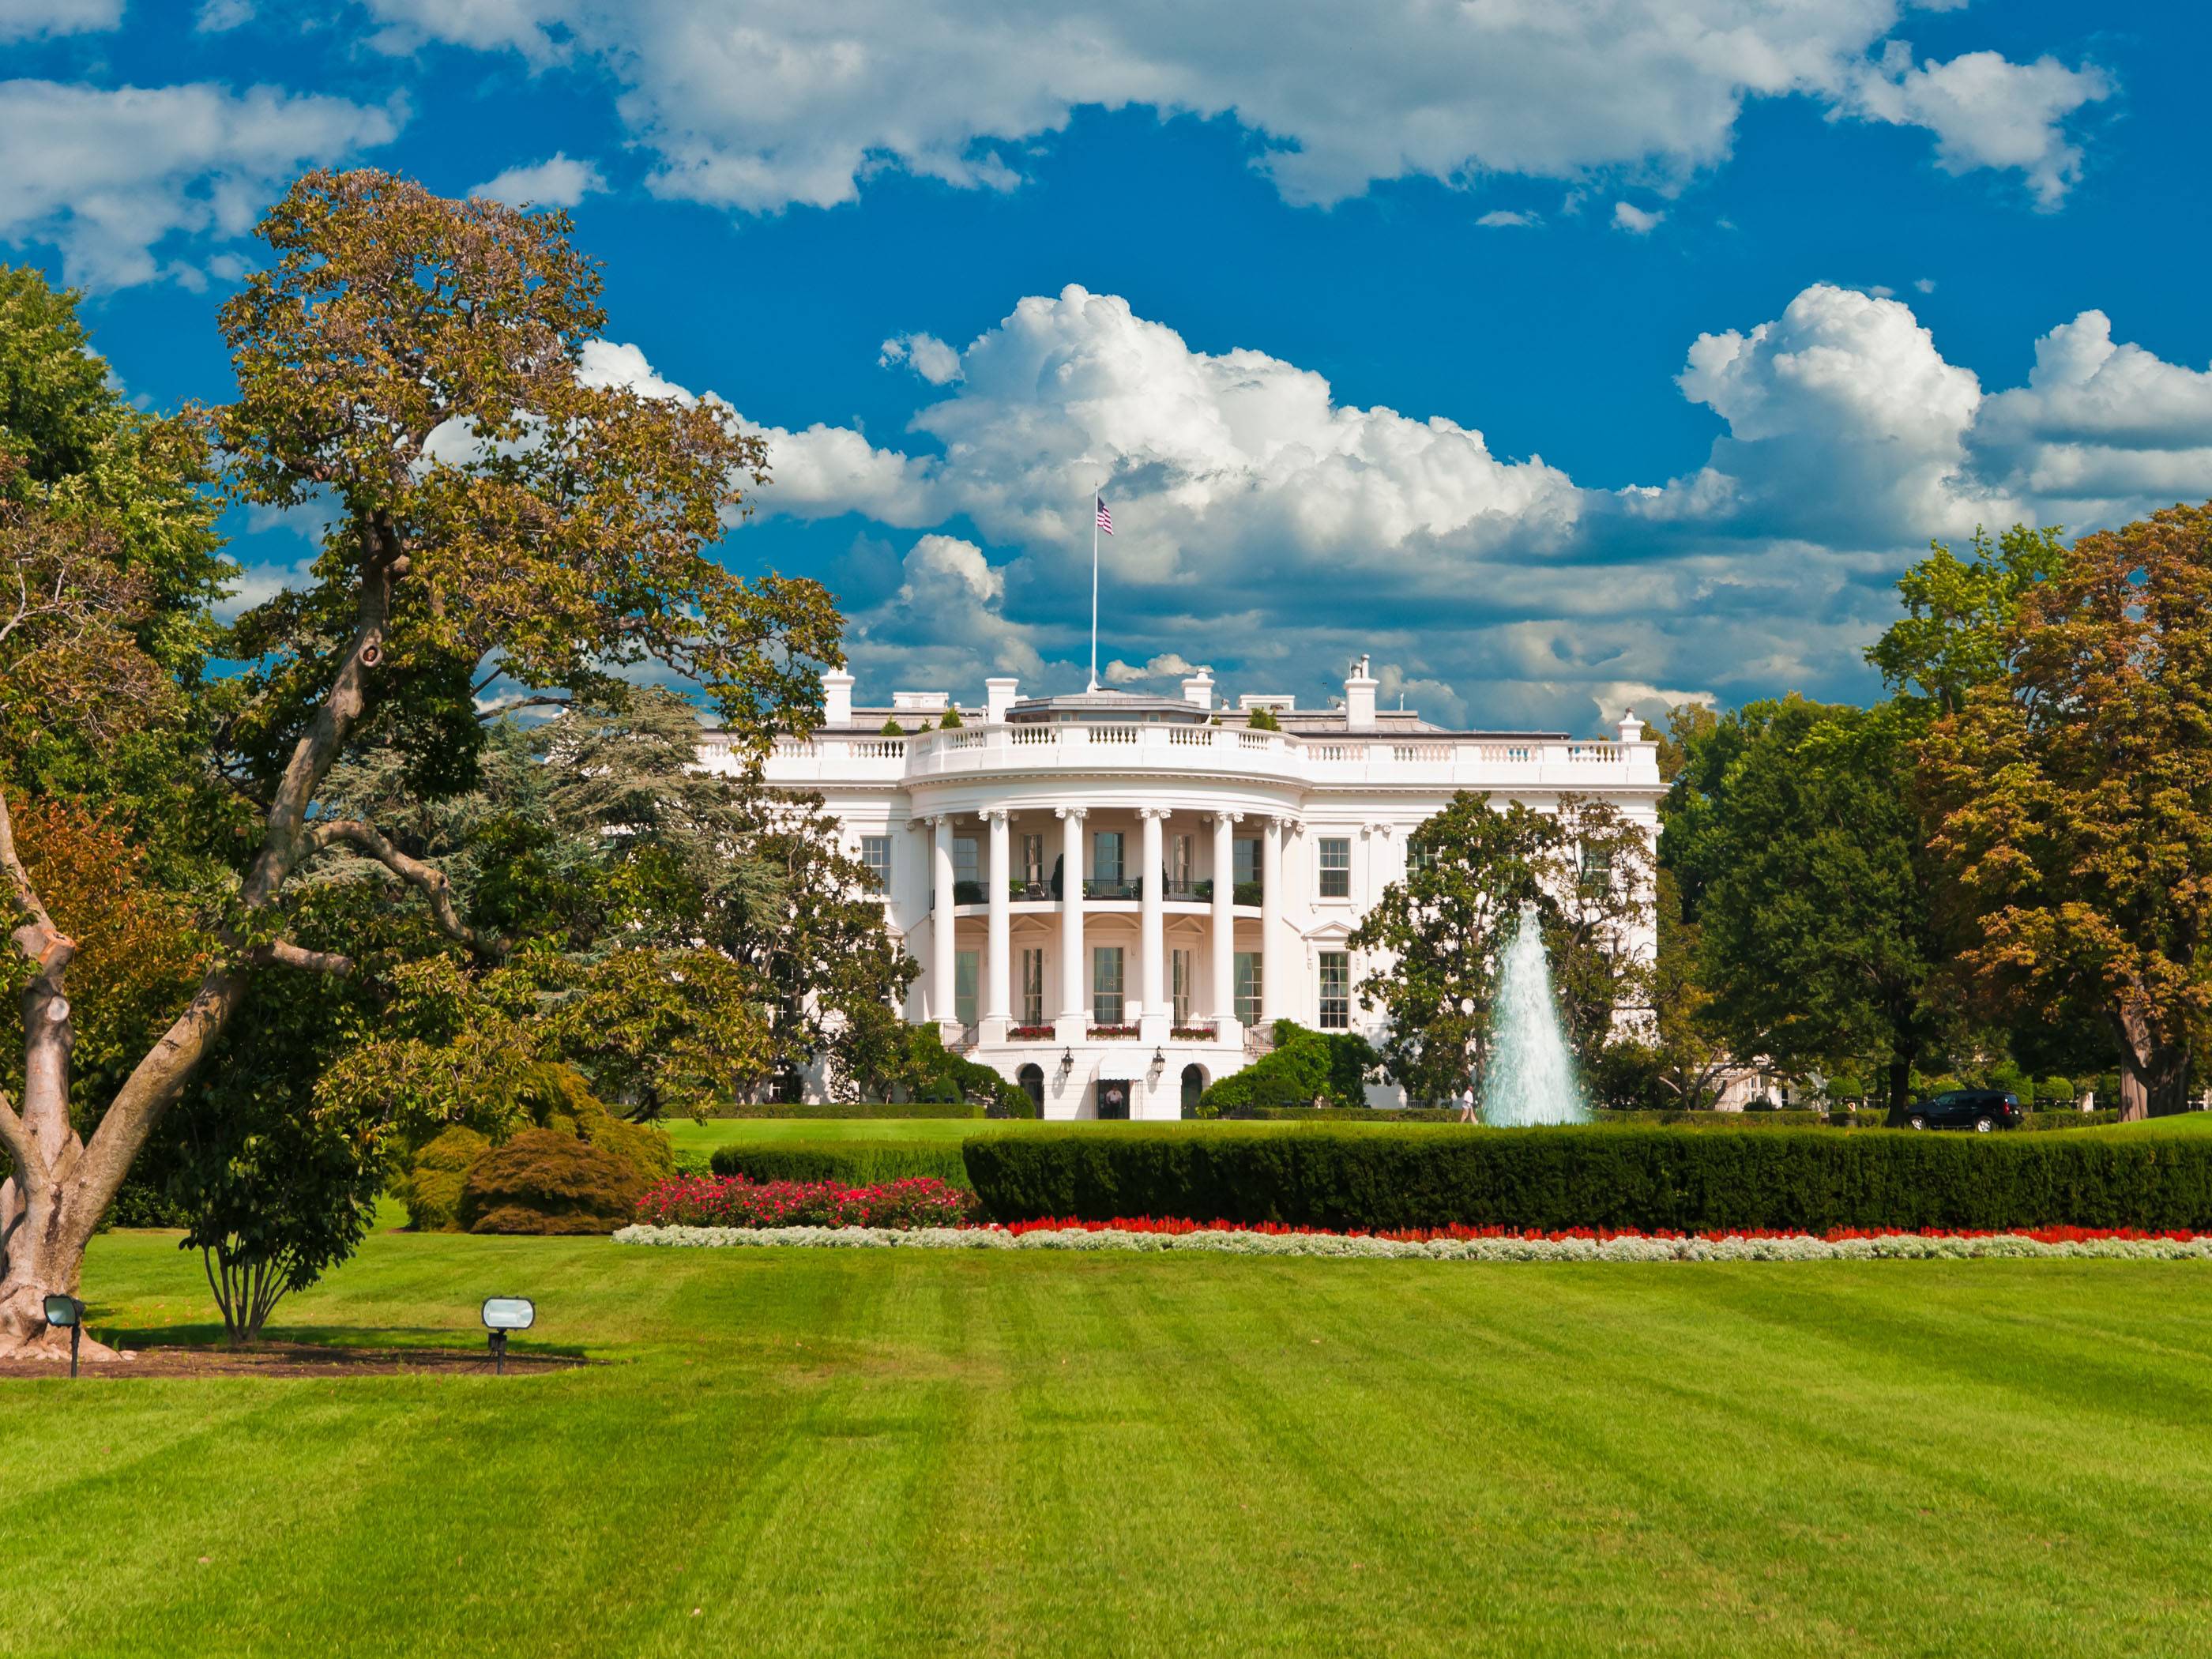 The White House. HQ Wallpaper for PC